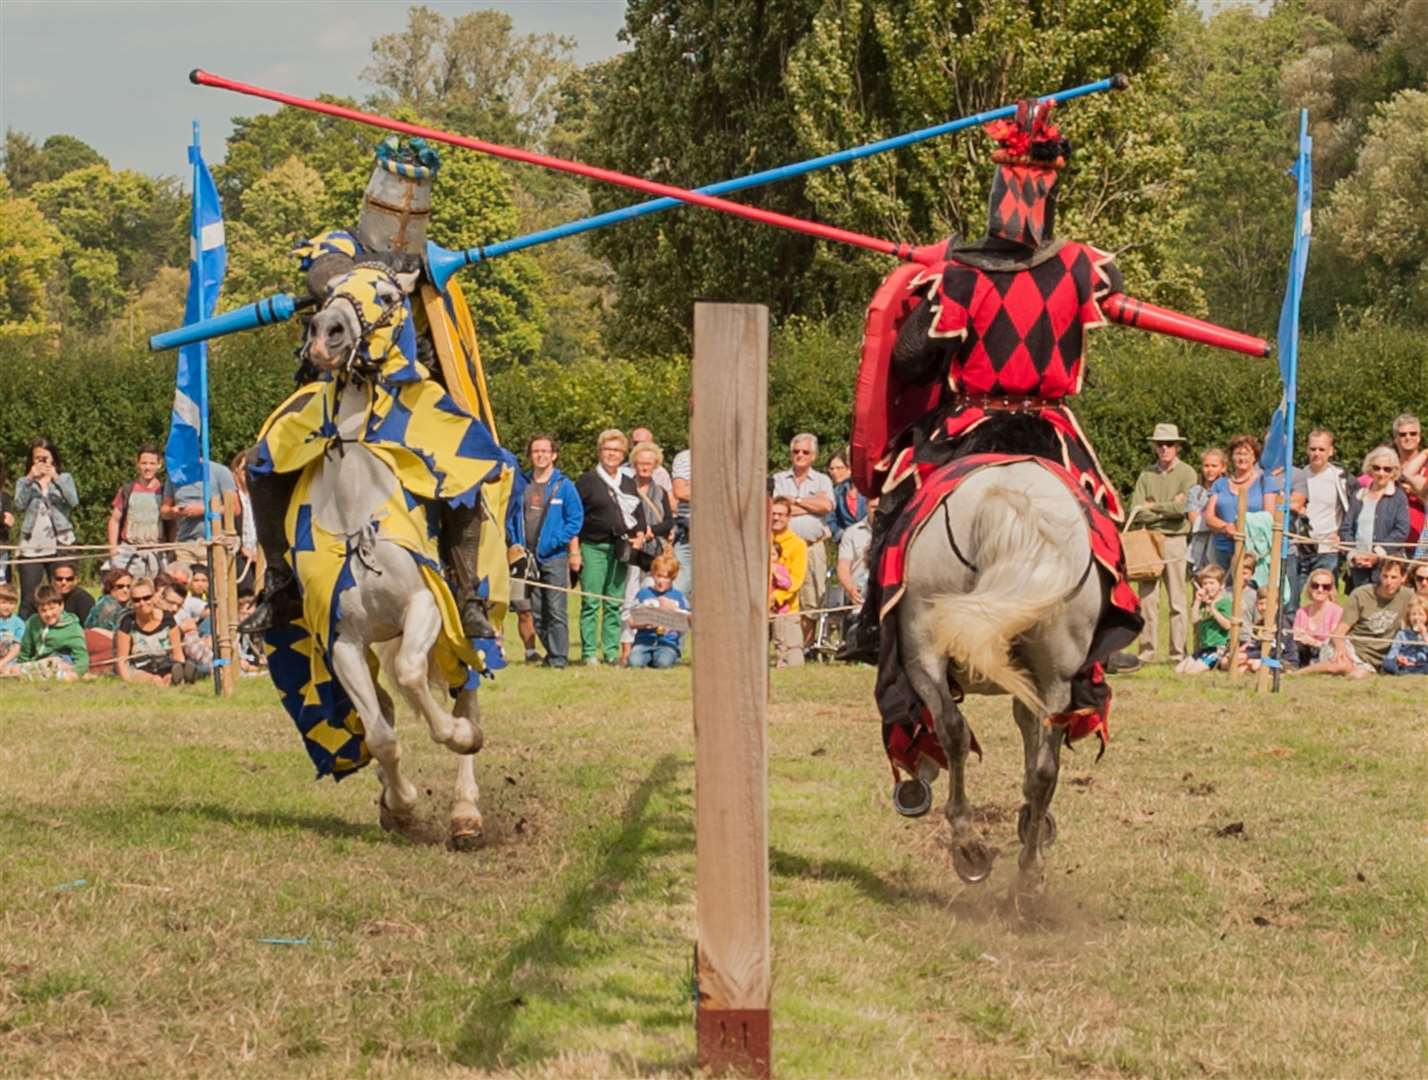 Jousting is set to return to Hever Castle this summer